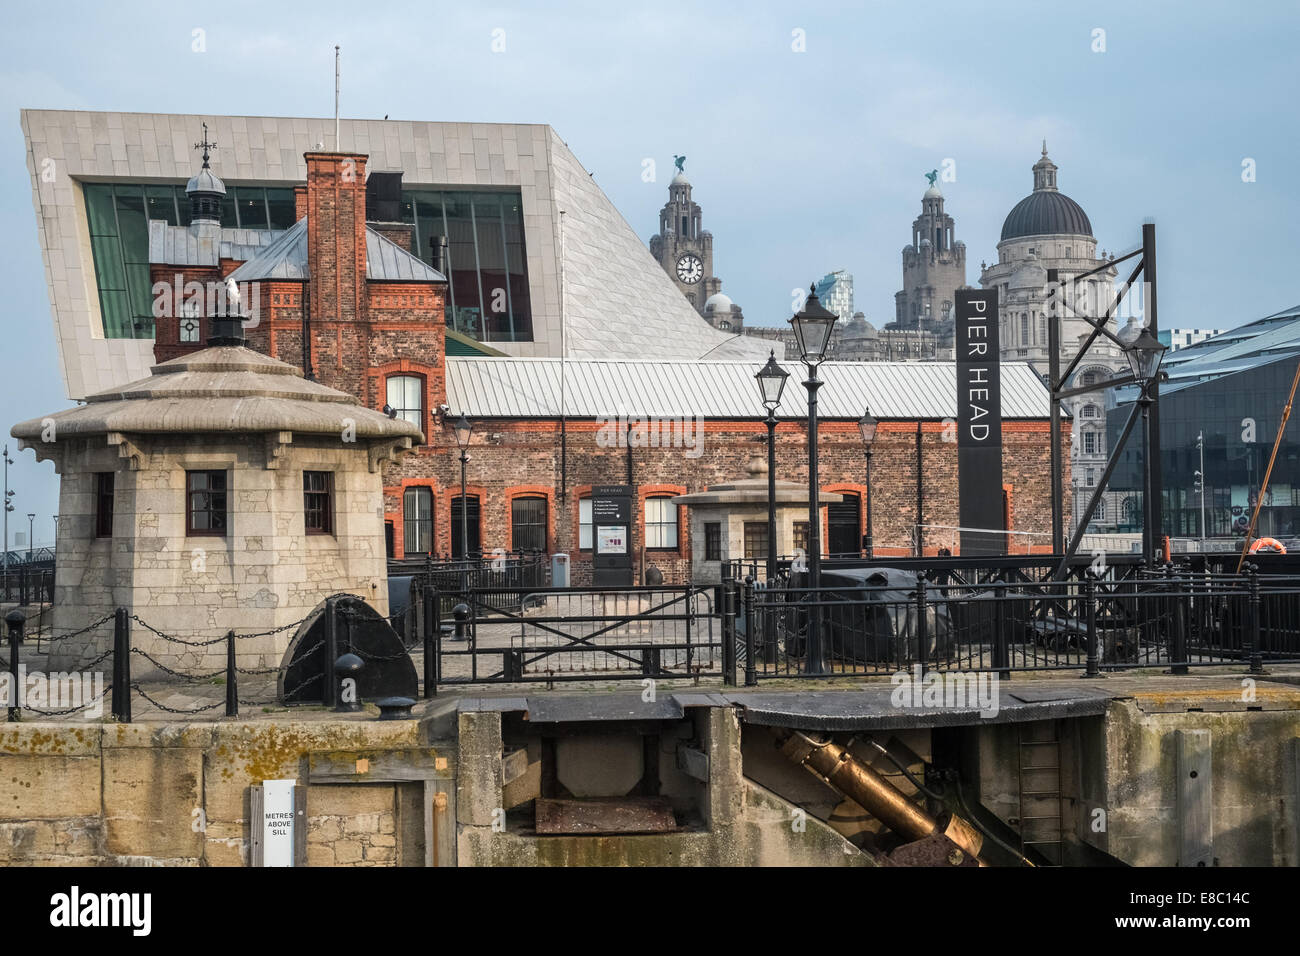 Different mix of architectural styles, Pier Head, Liverpool, Merseyside, England UK Stock Photo